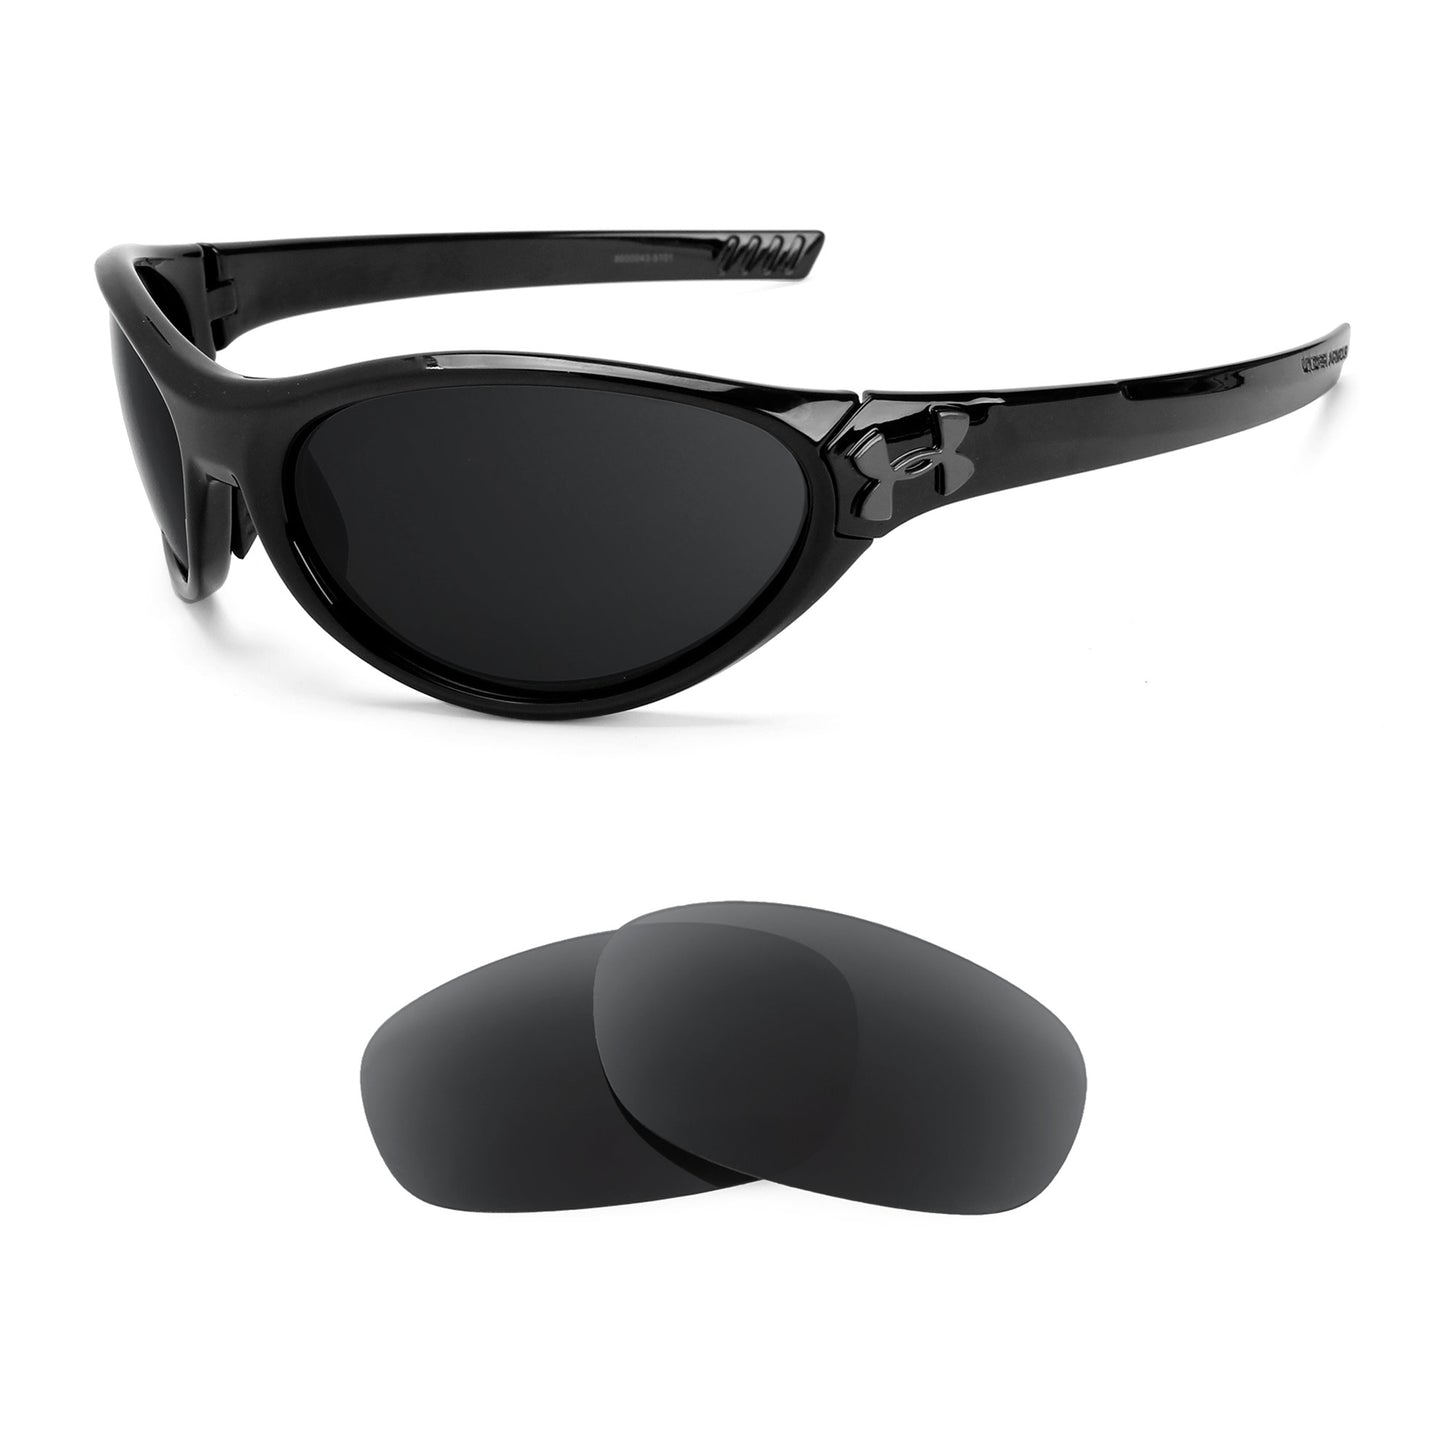 Under Armour Glyde sunglasses with replacement lenses